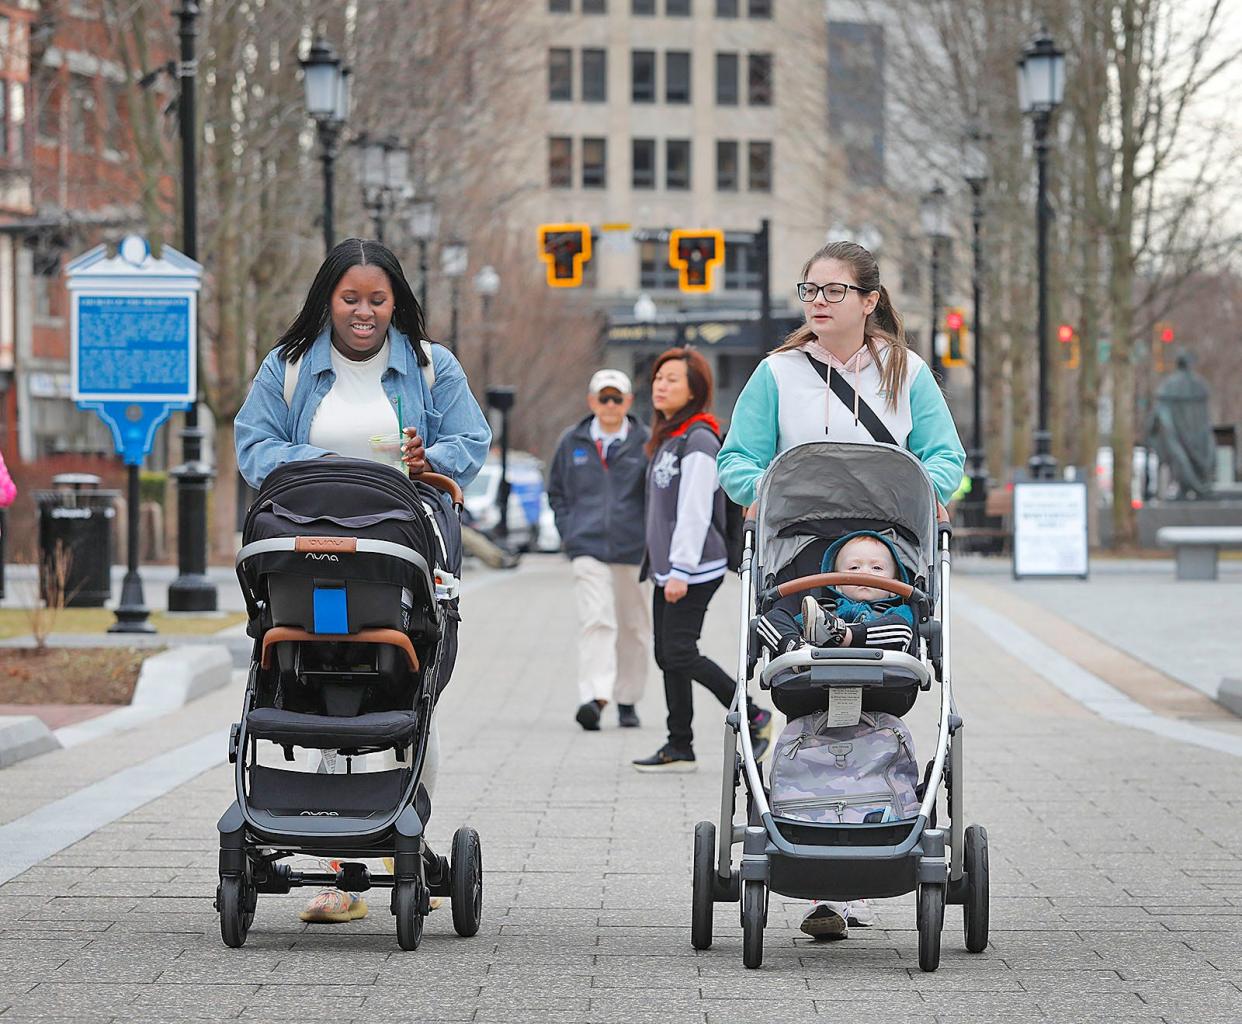 Amelia Williams and her 3-month-old son Callum stroll with Caitlin Connolly and her 20-month-old son Carson. Warm weather got people outside and moving in Quincy on Thursday, Feb. 16, 2023.